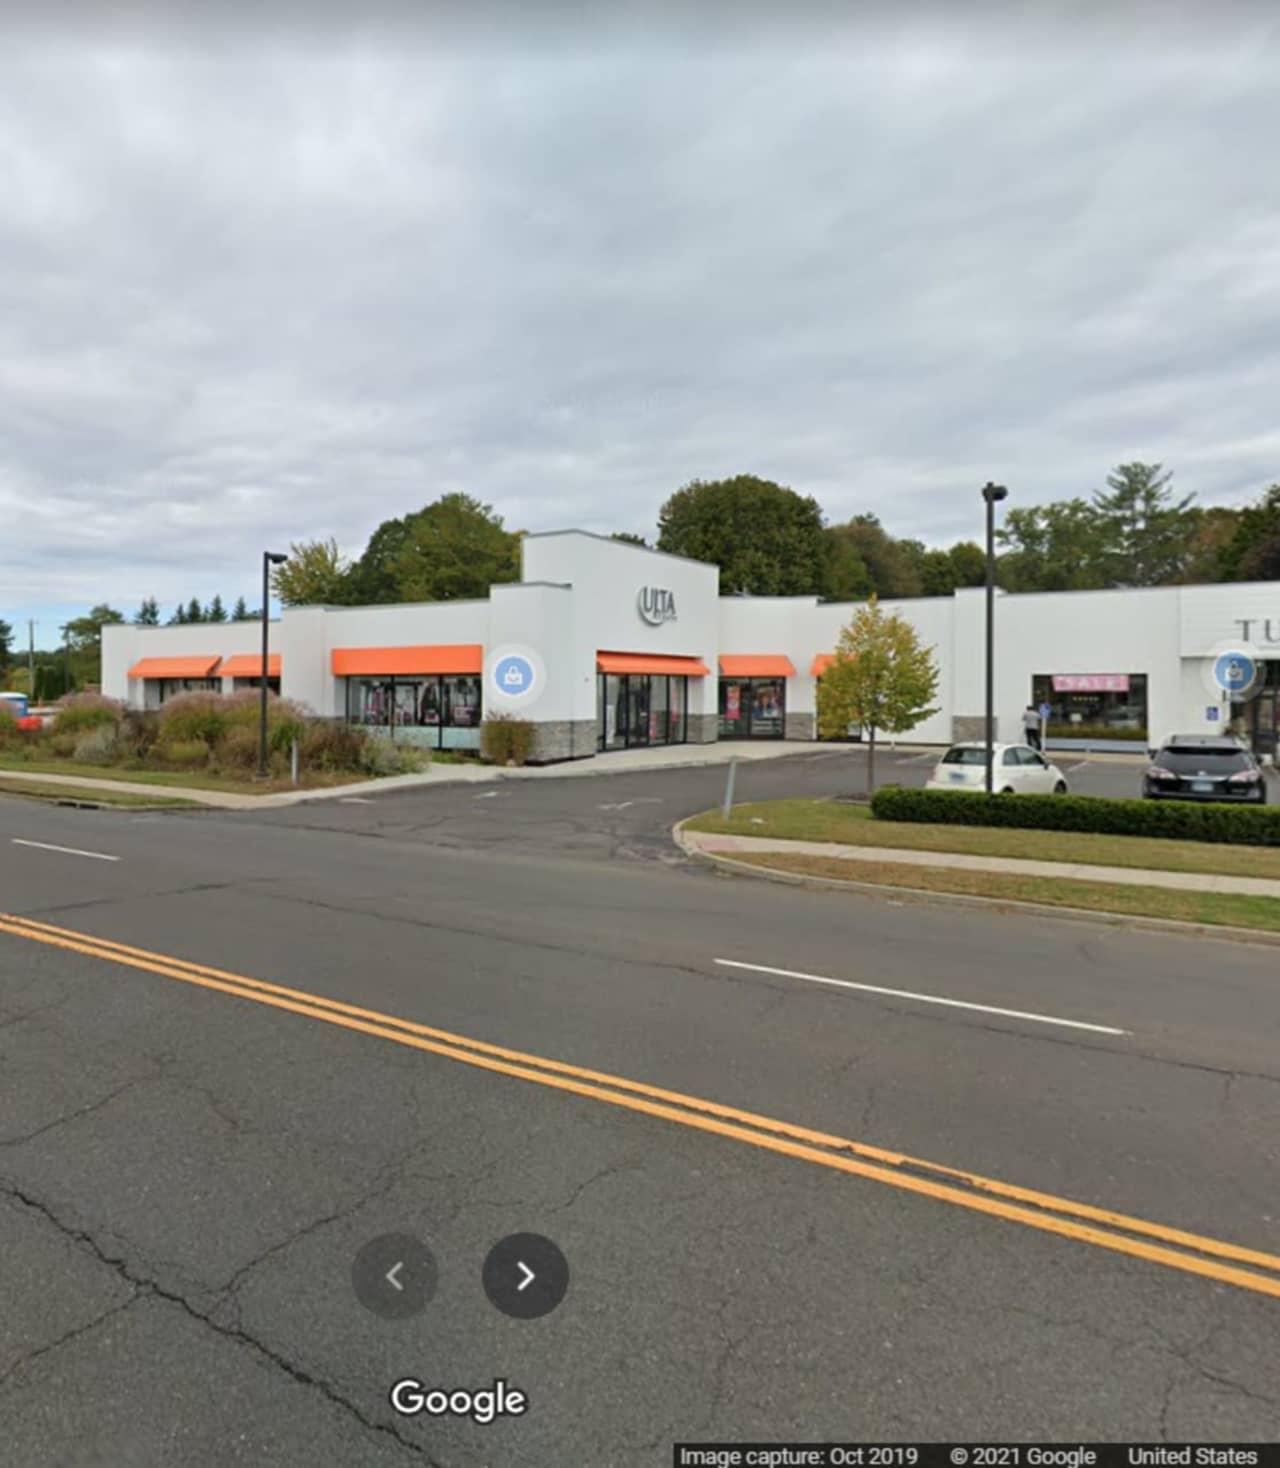 Westport Police said officers responded to a report of shoplifting just before 7 p.m. on Aug. 13, 2020 at the Ulta Beauty located at 1365 Post Road East.